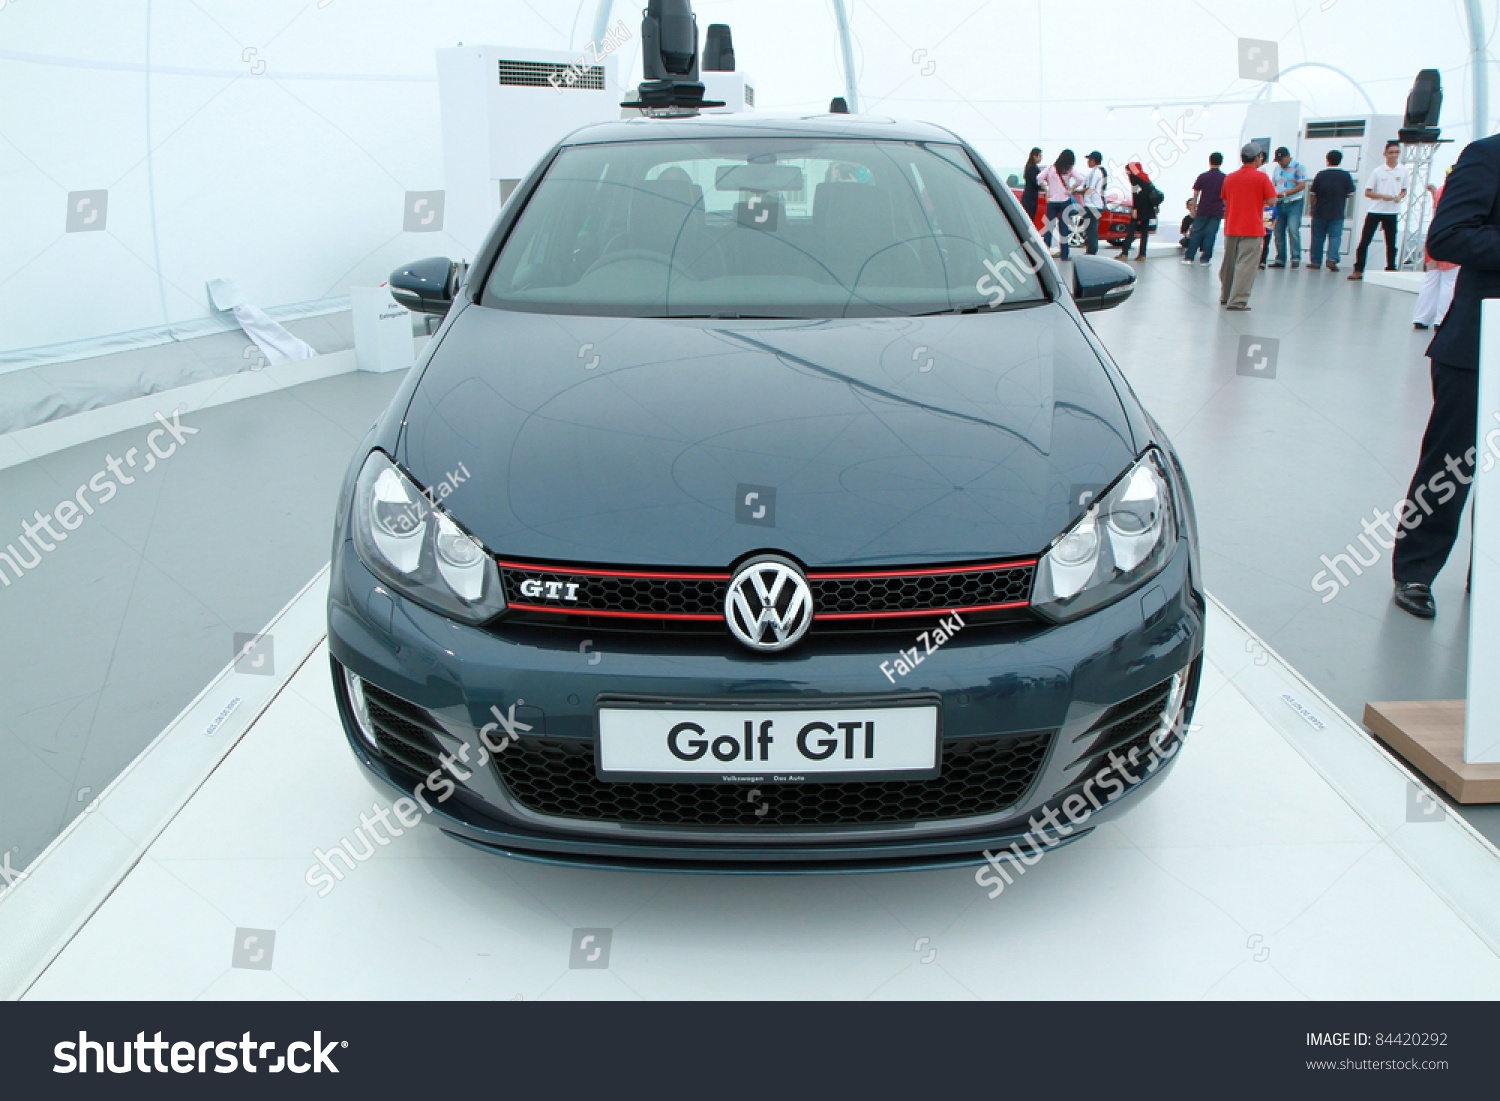 Kuala Lumpur - Sept 10: Front View Of Vw Golf Gti On Display At The ...